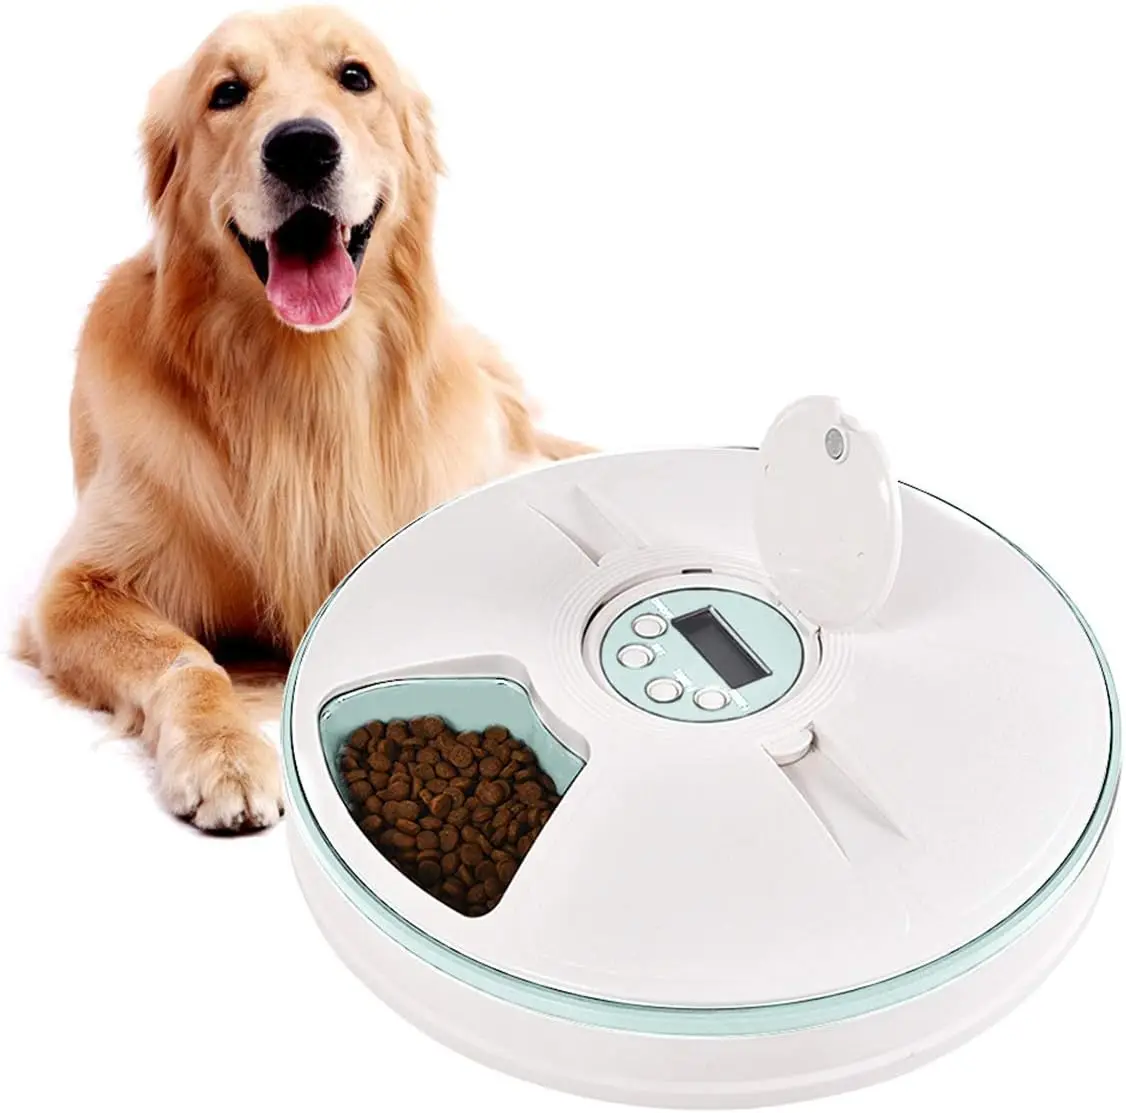 

Automatic Pet Feeder Auto Dog Food Dispenser with Programmable Timer 6-Meals Automatic Dog Feeder for Medium Large Cats Dogs